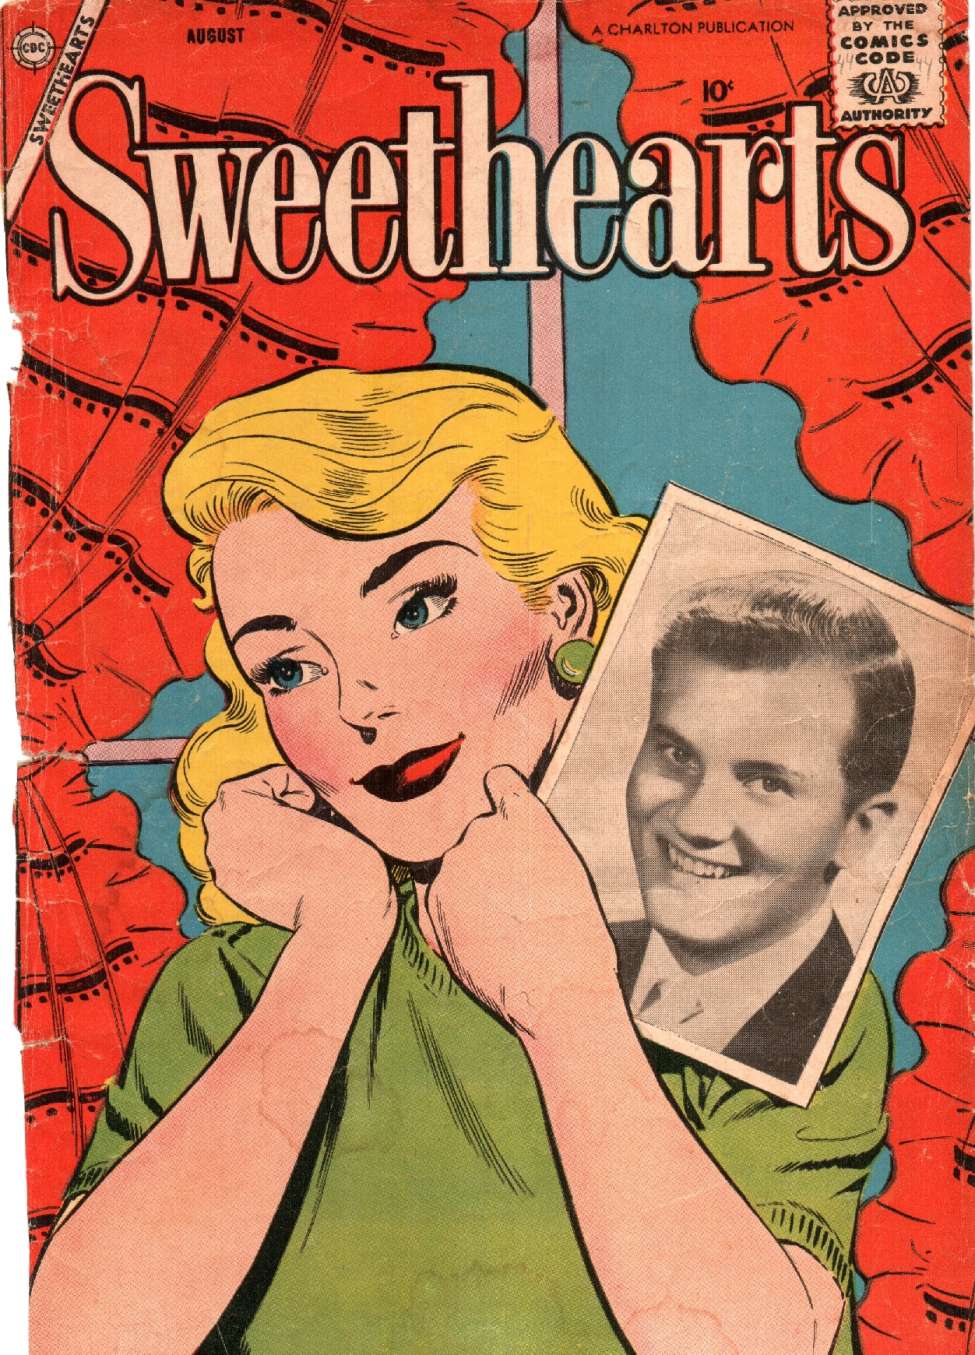 Comic Book Cover For Sweethearts 44 (damaged) - Version 2